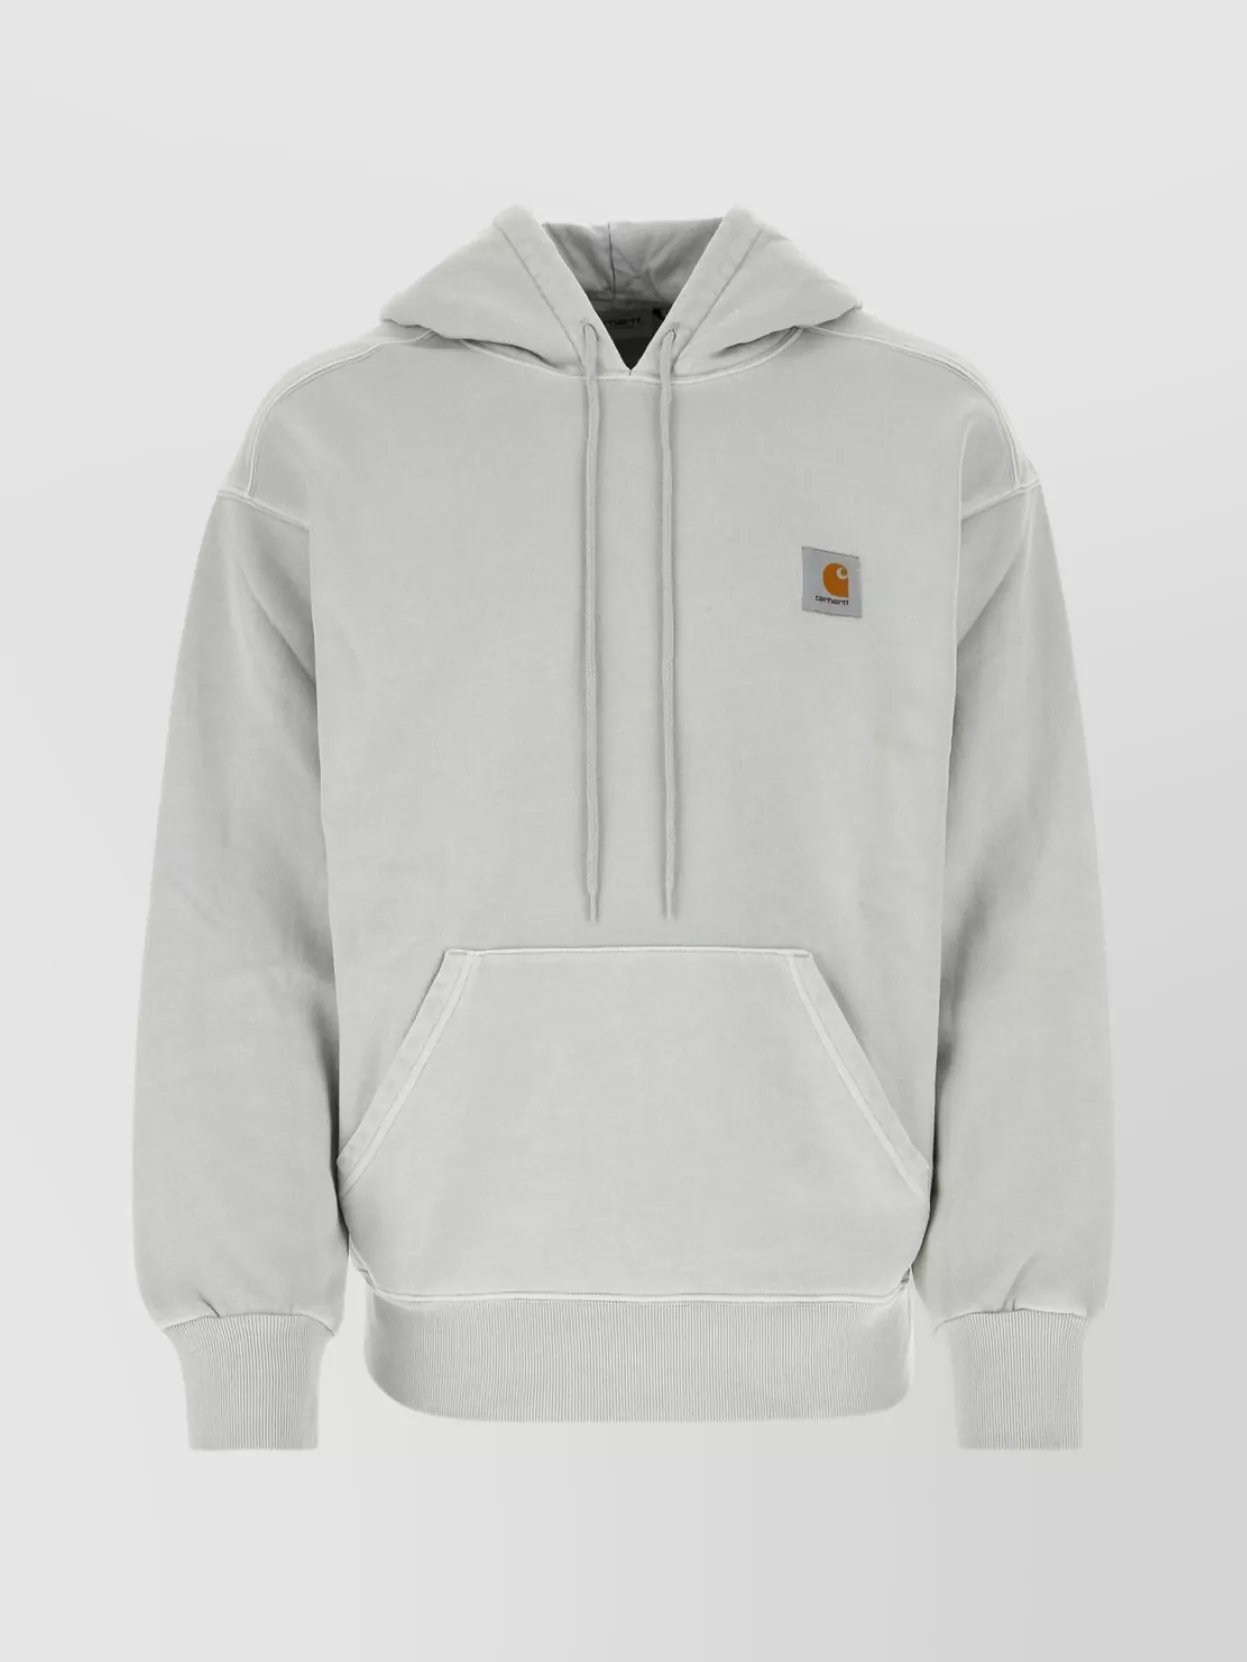 Carhartt Nelson Sweatshirt With Hood And Pouch Pocket In Gray